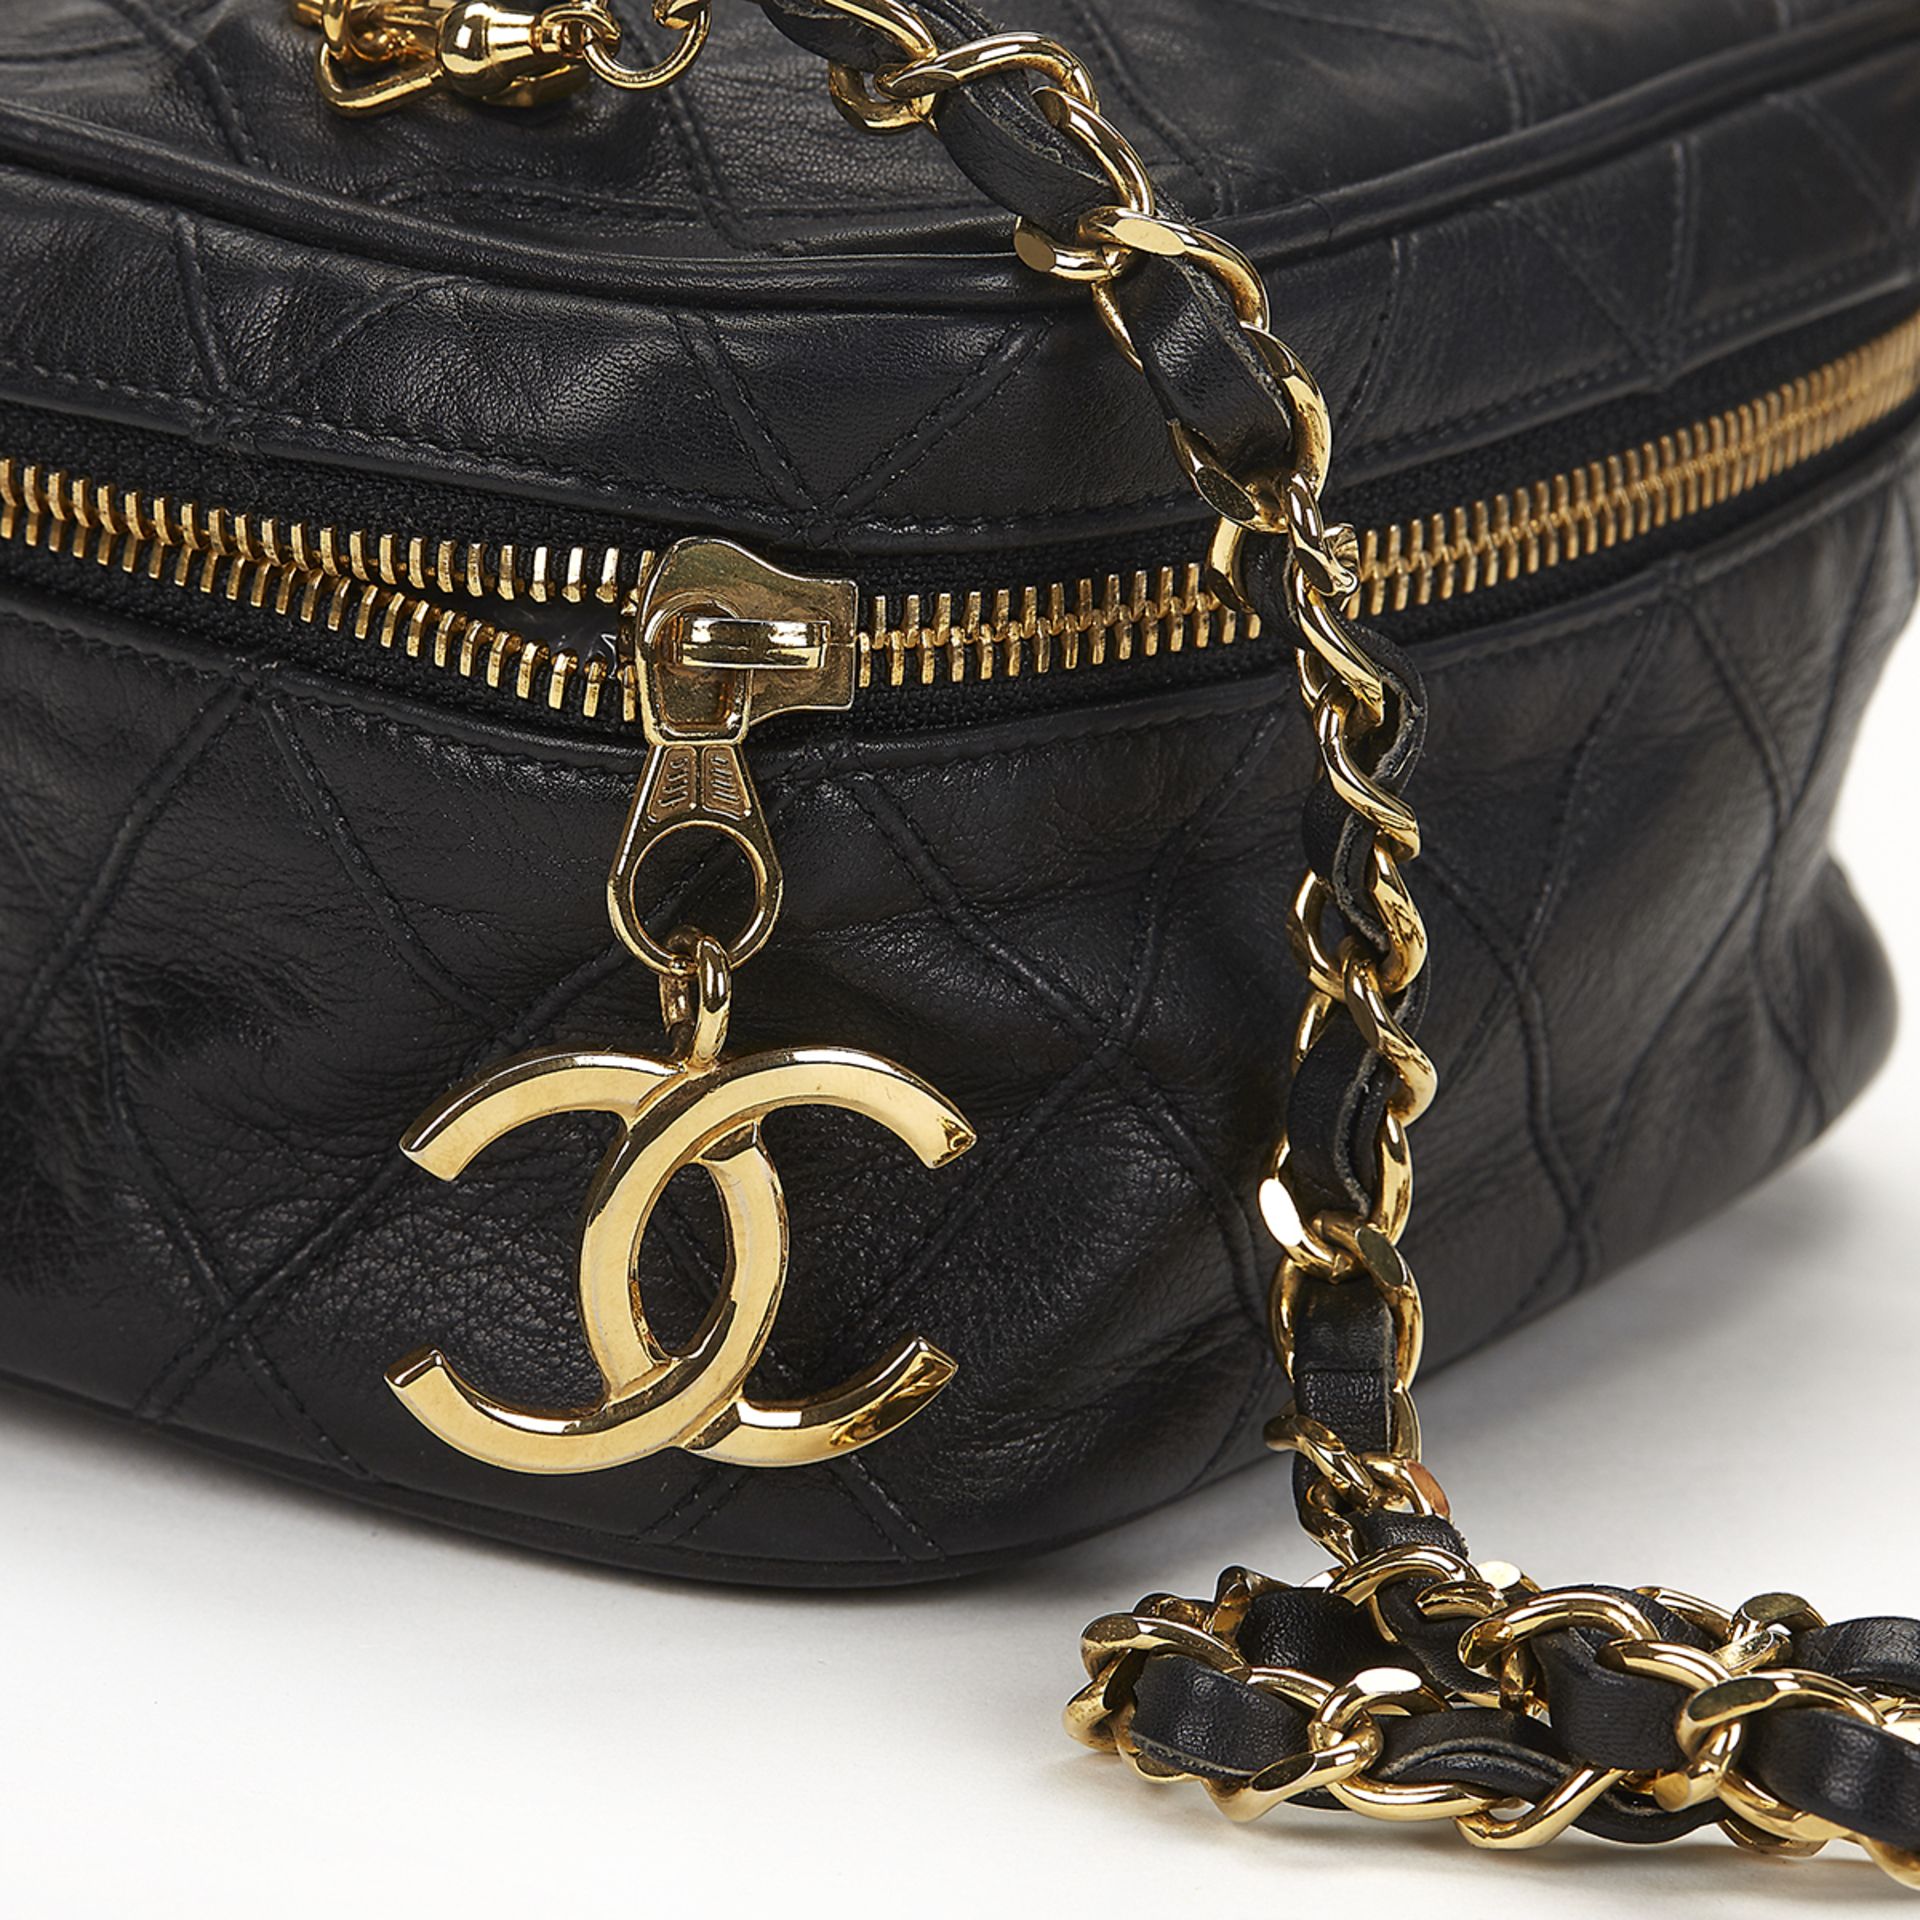 CHANEL Mini Timeless Train Case - Image 5 of 9